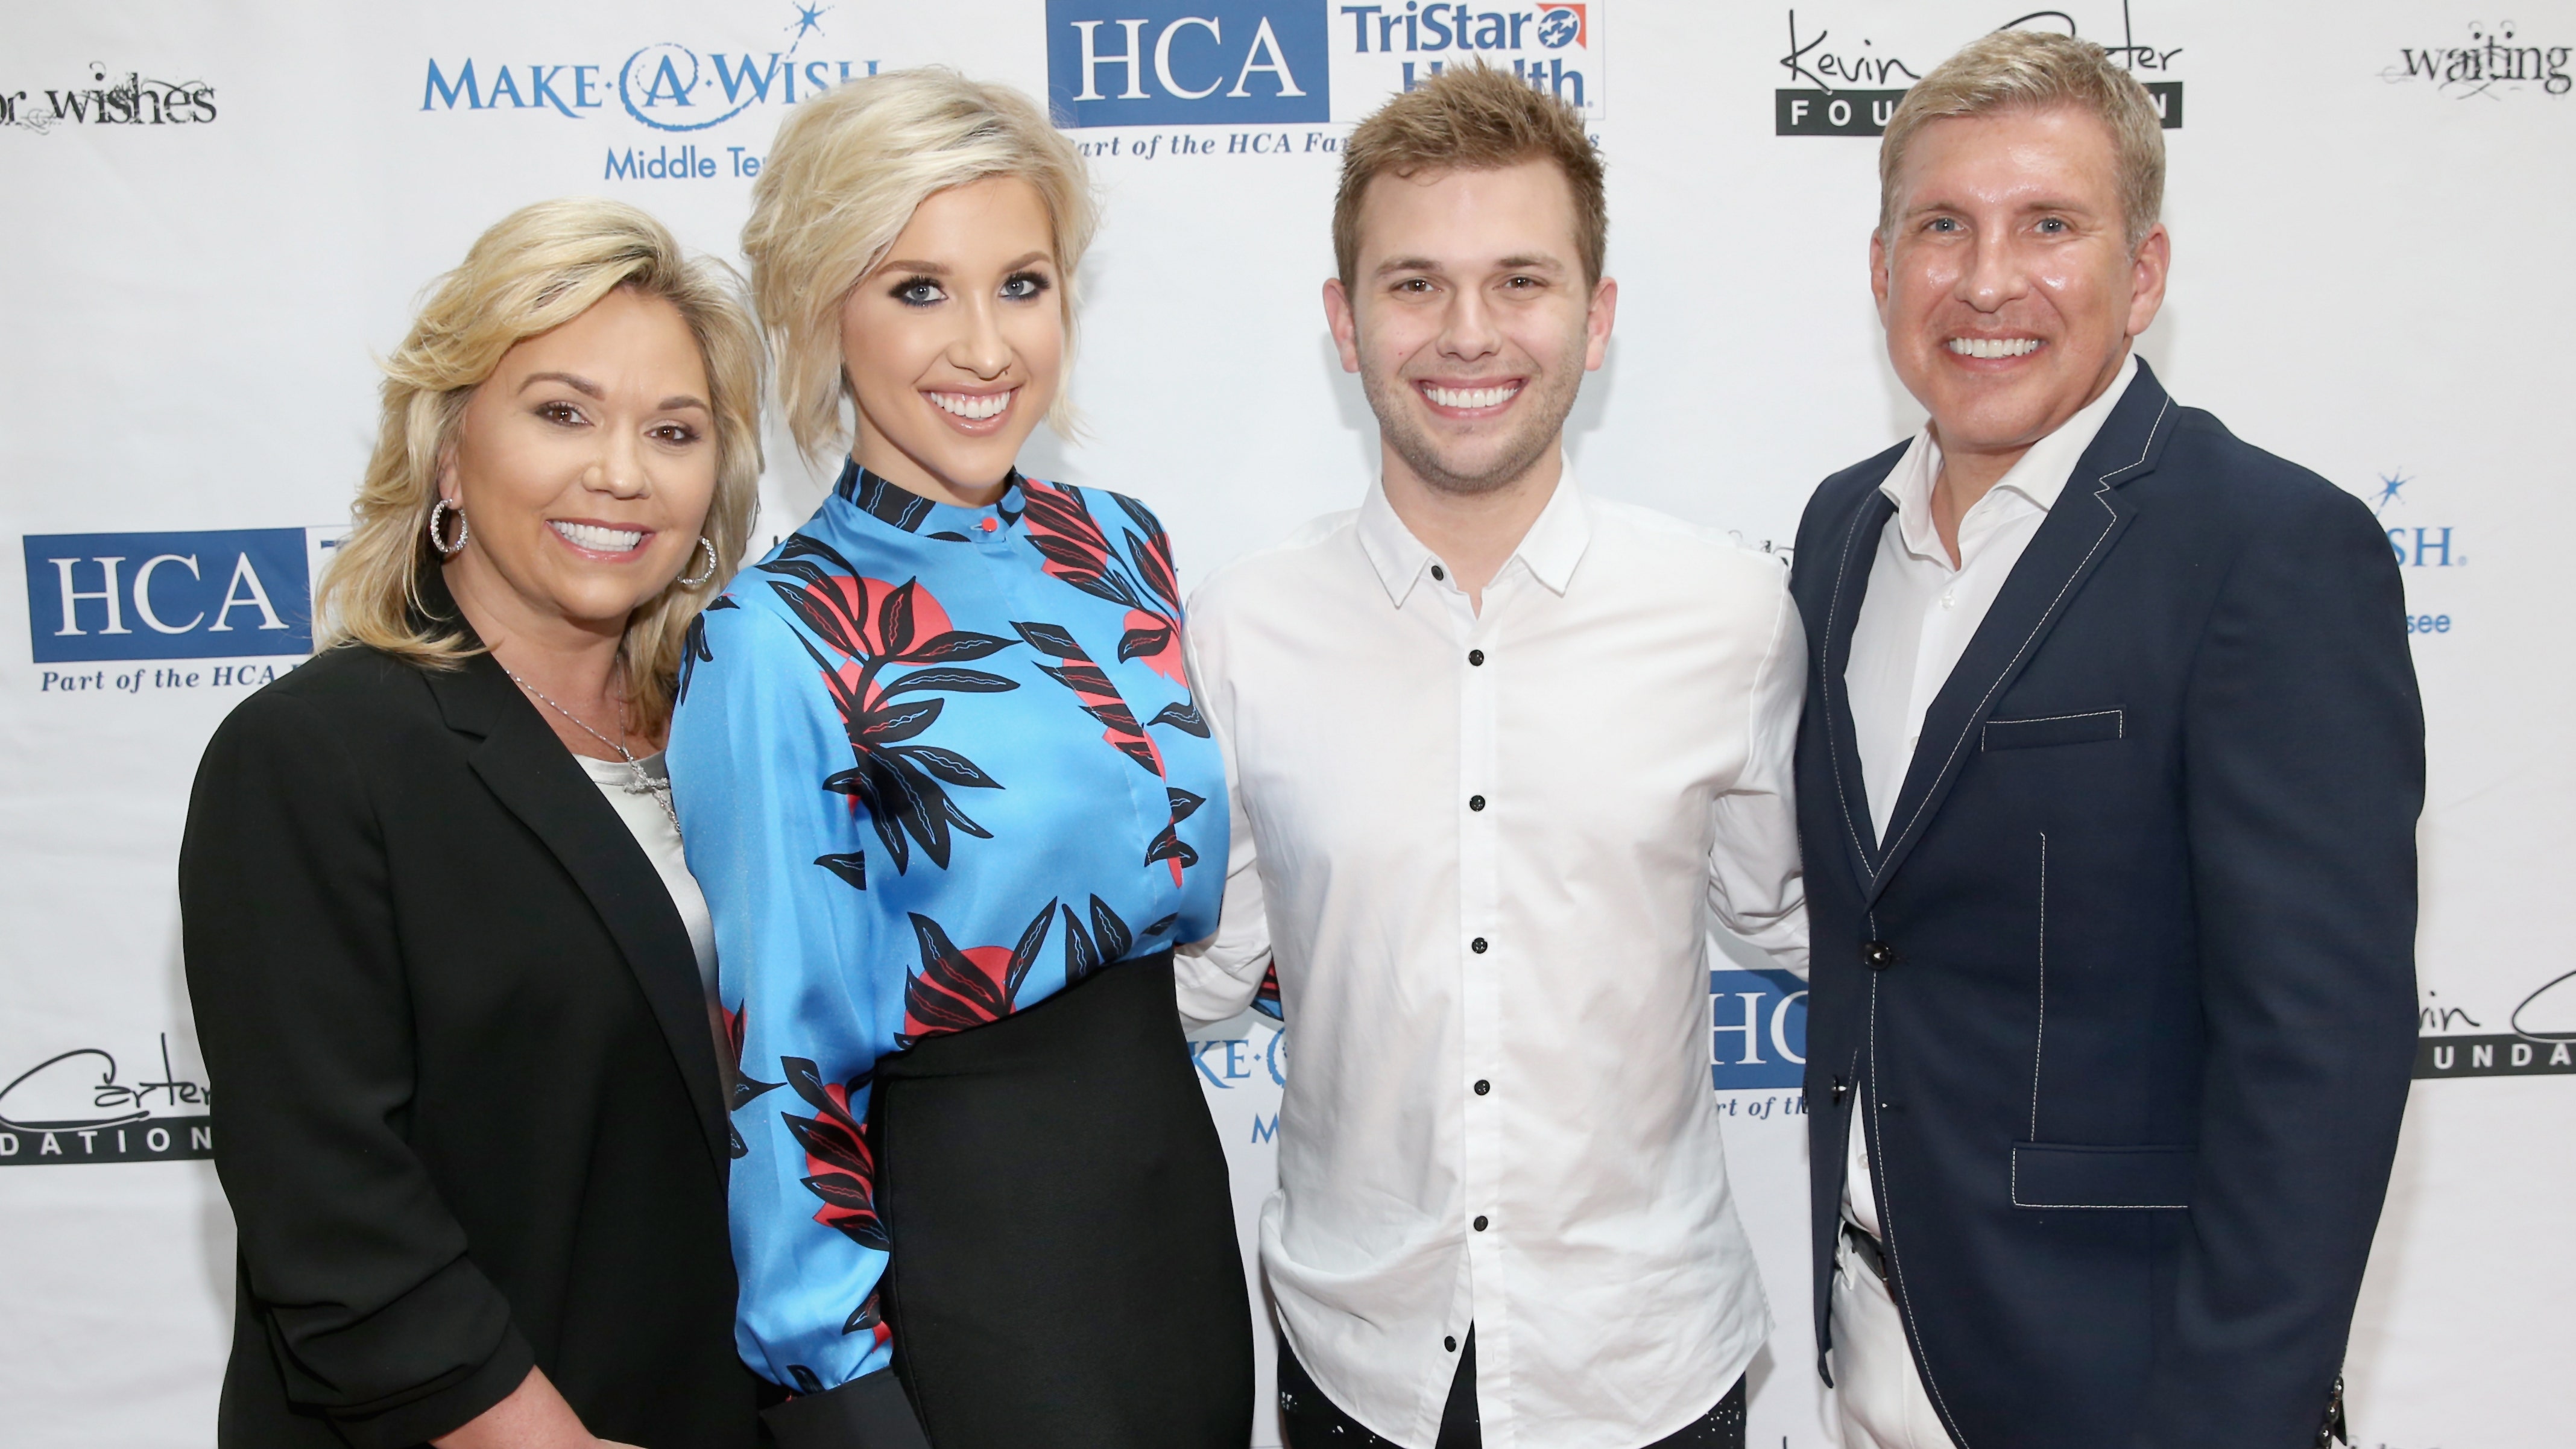 Chrisley Knows Best' stars Julie and Todd Chrisley: What to know about...